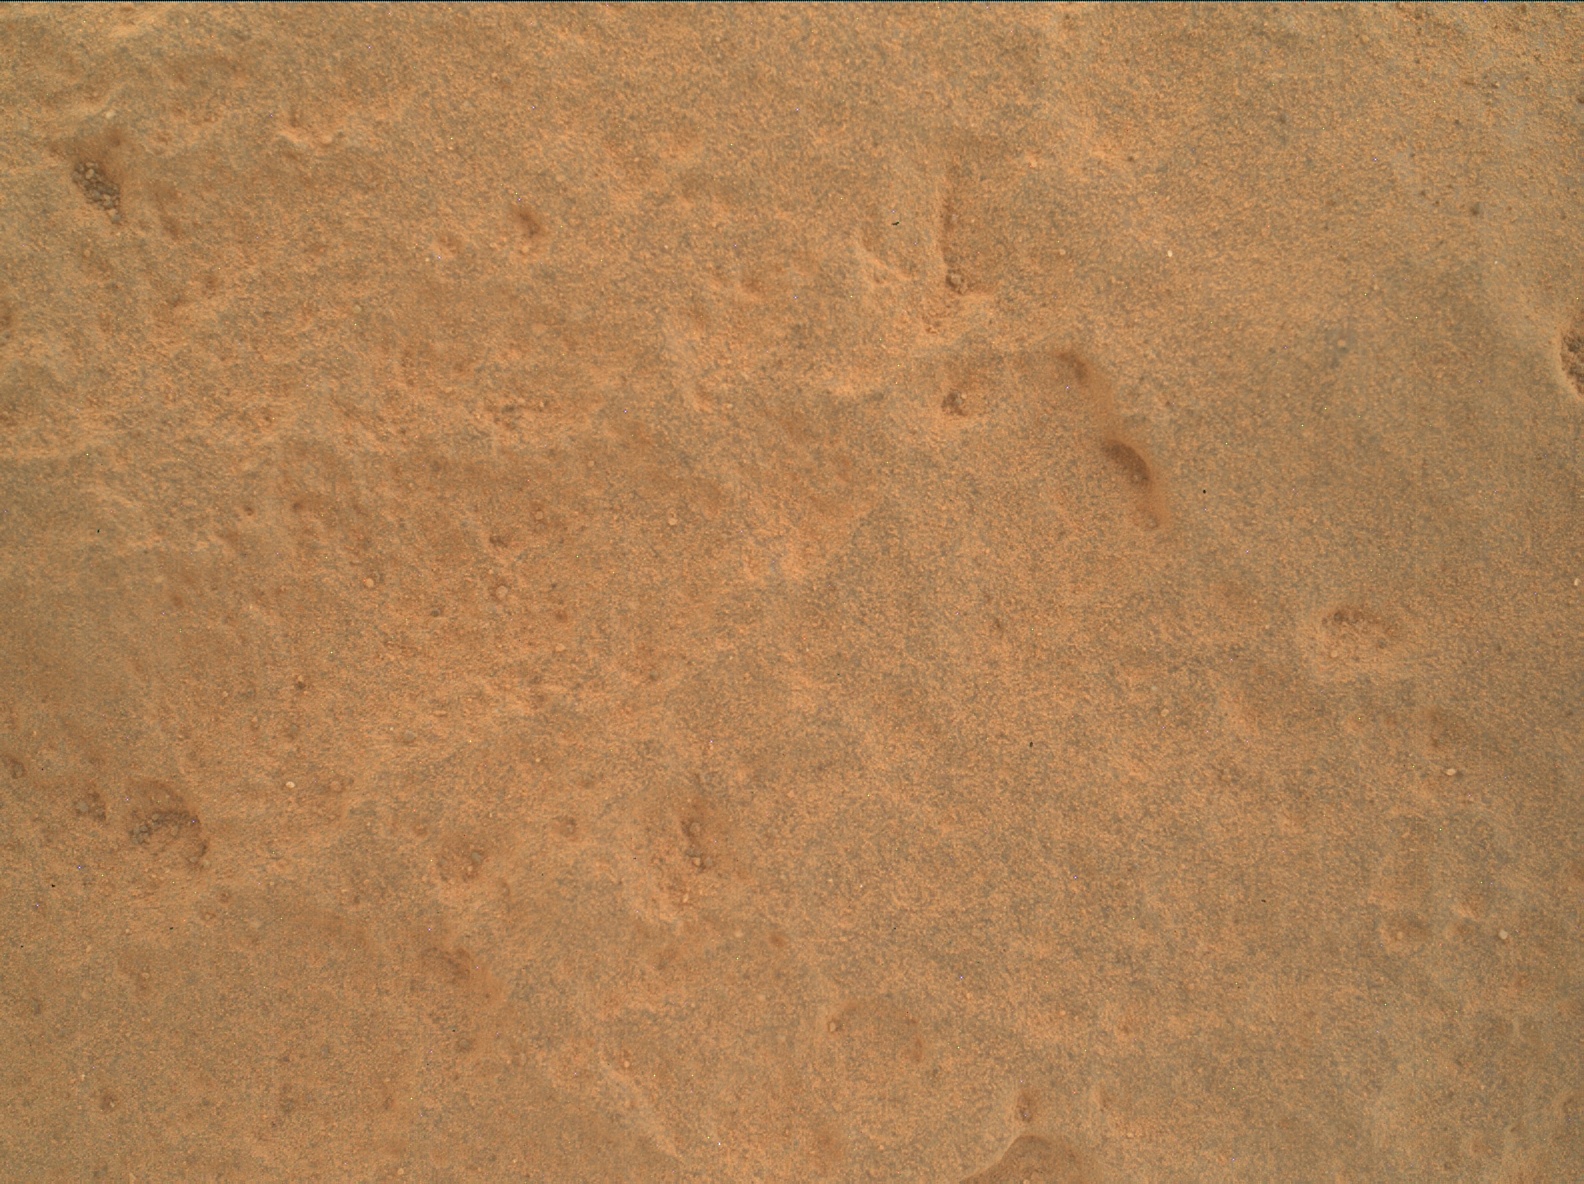 Nasa's Mars rover Curiosity acquired this image using its Mars Hand Lens Imager (MAHLI) on Sol 3449